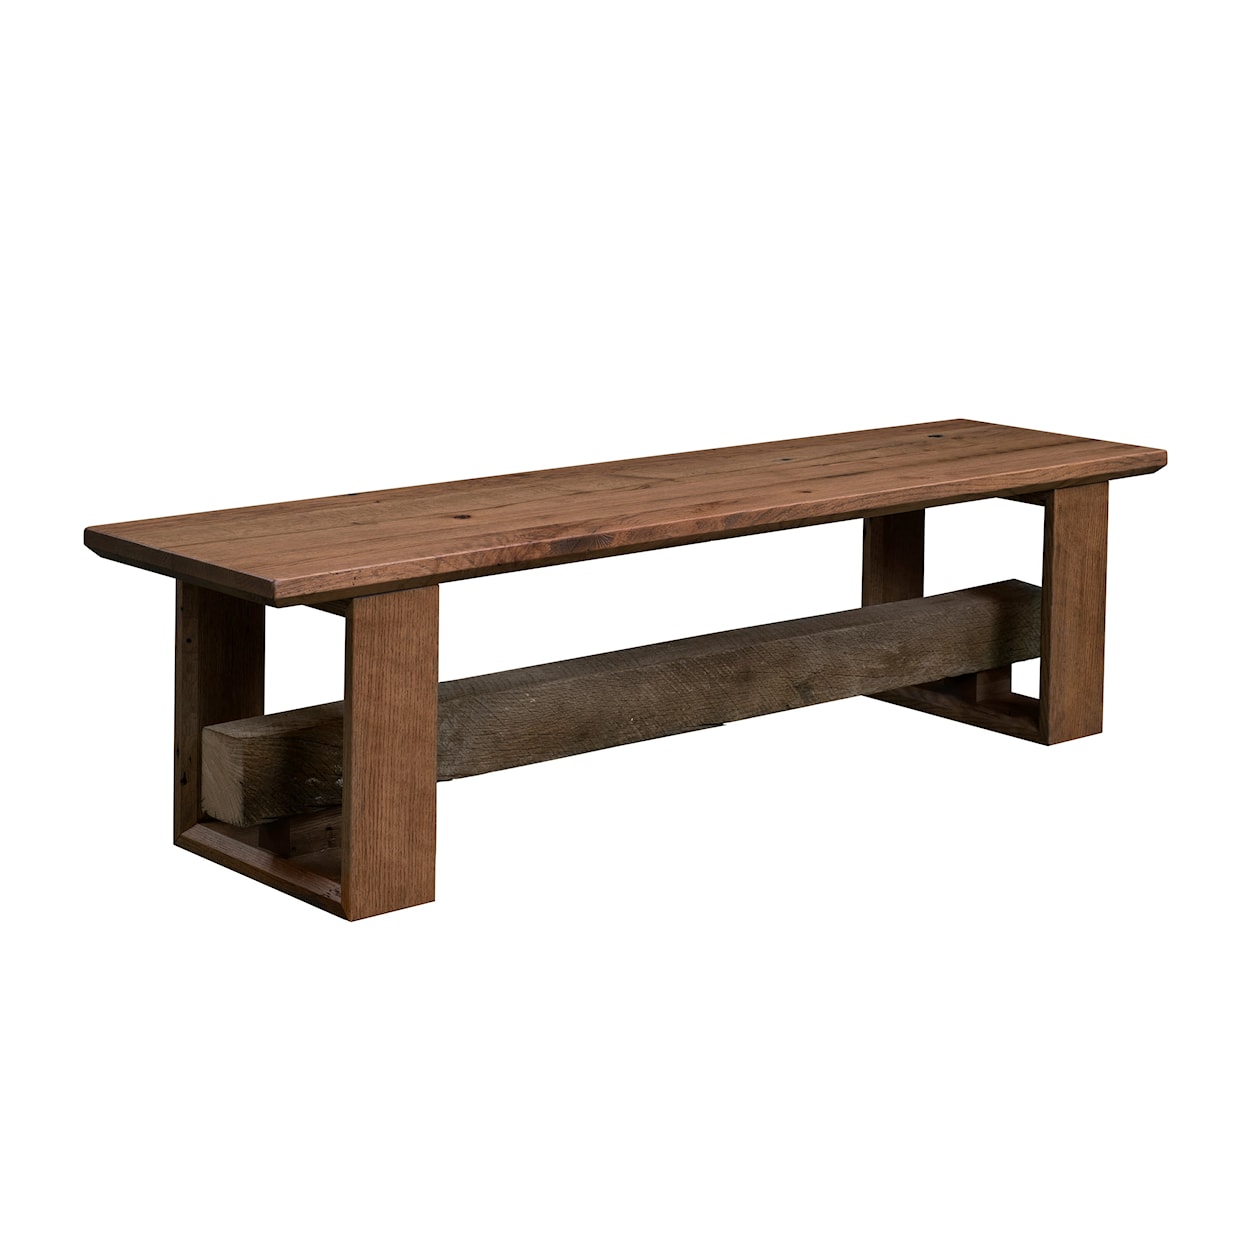 Urban Barnwood Furniture 1869 Dining 60" Accent Bench